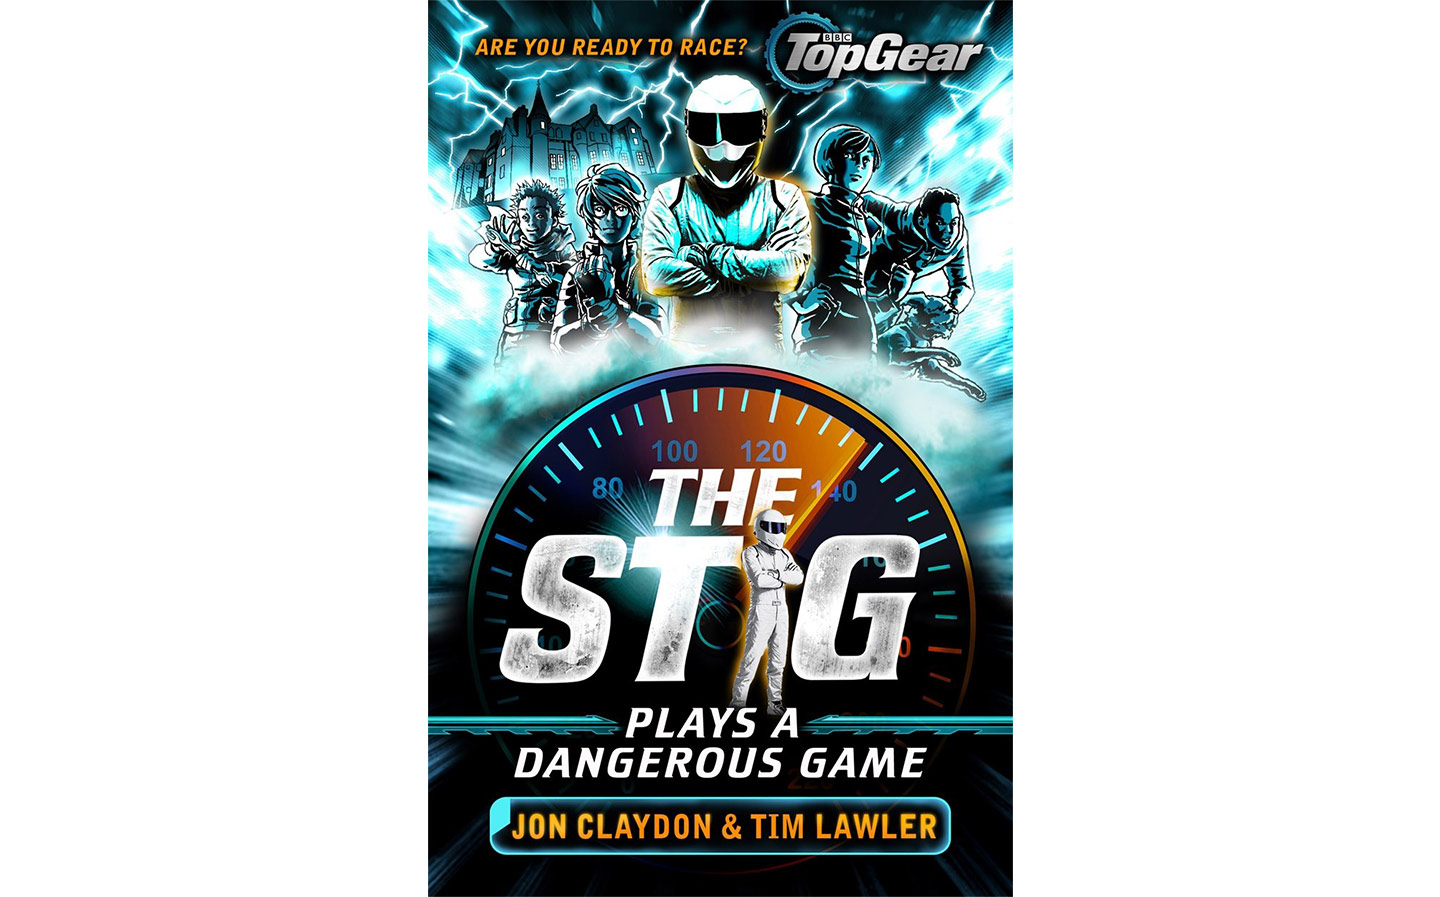 Christmas gift ideas for car fan: The Stig plays a dangerous game teen fiction book